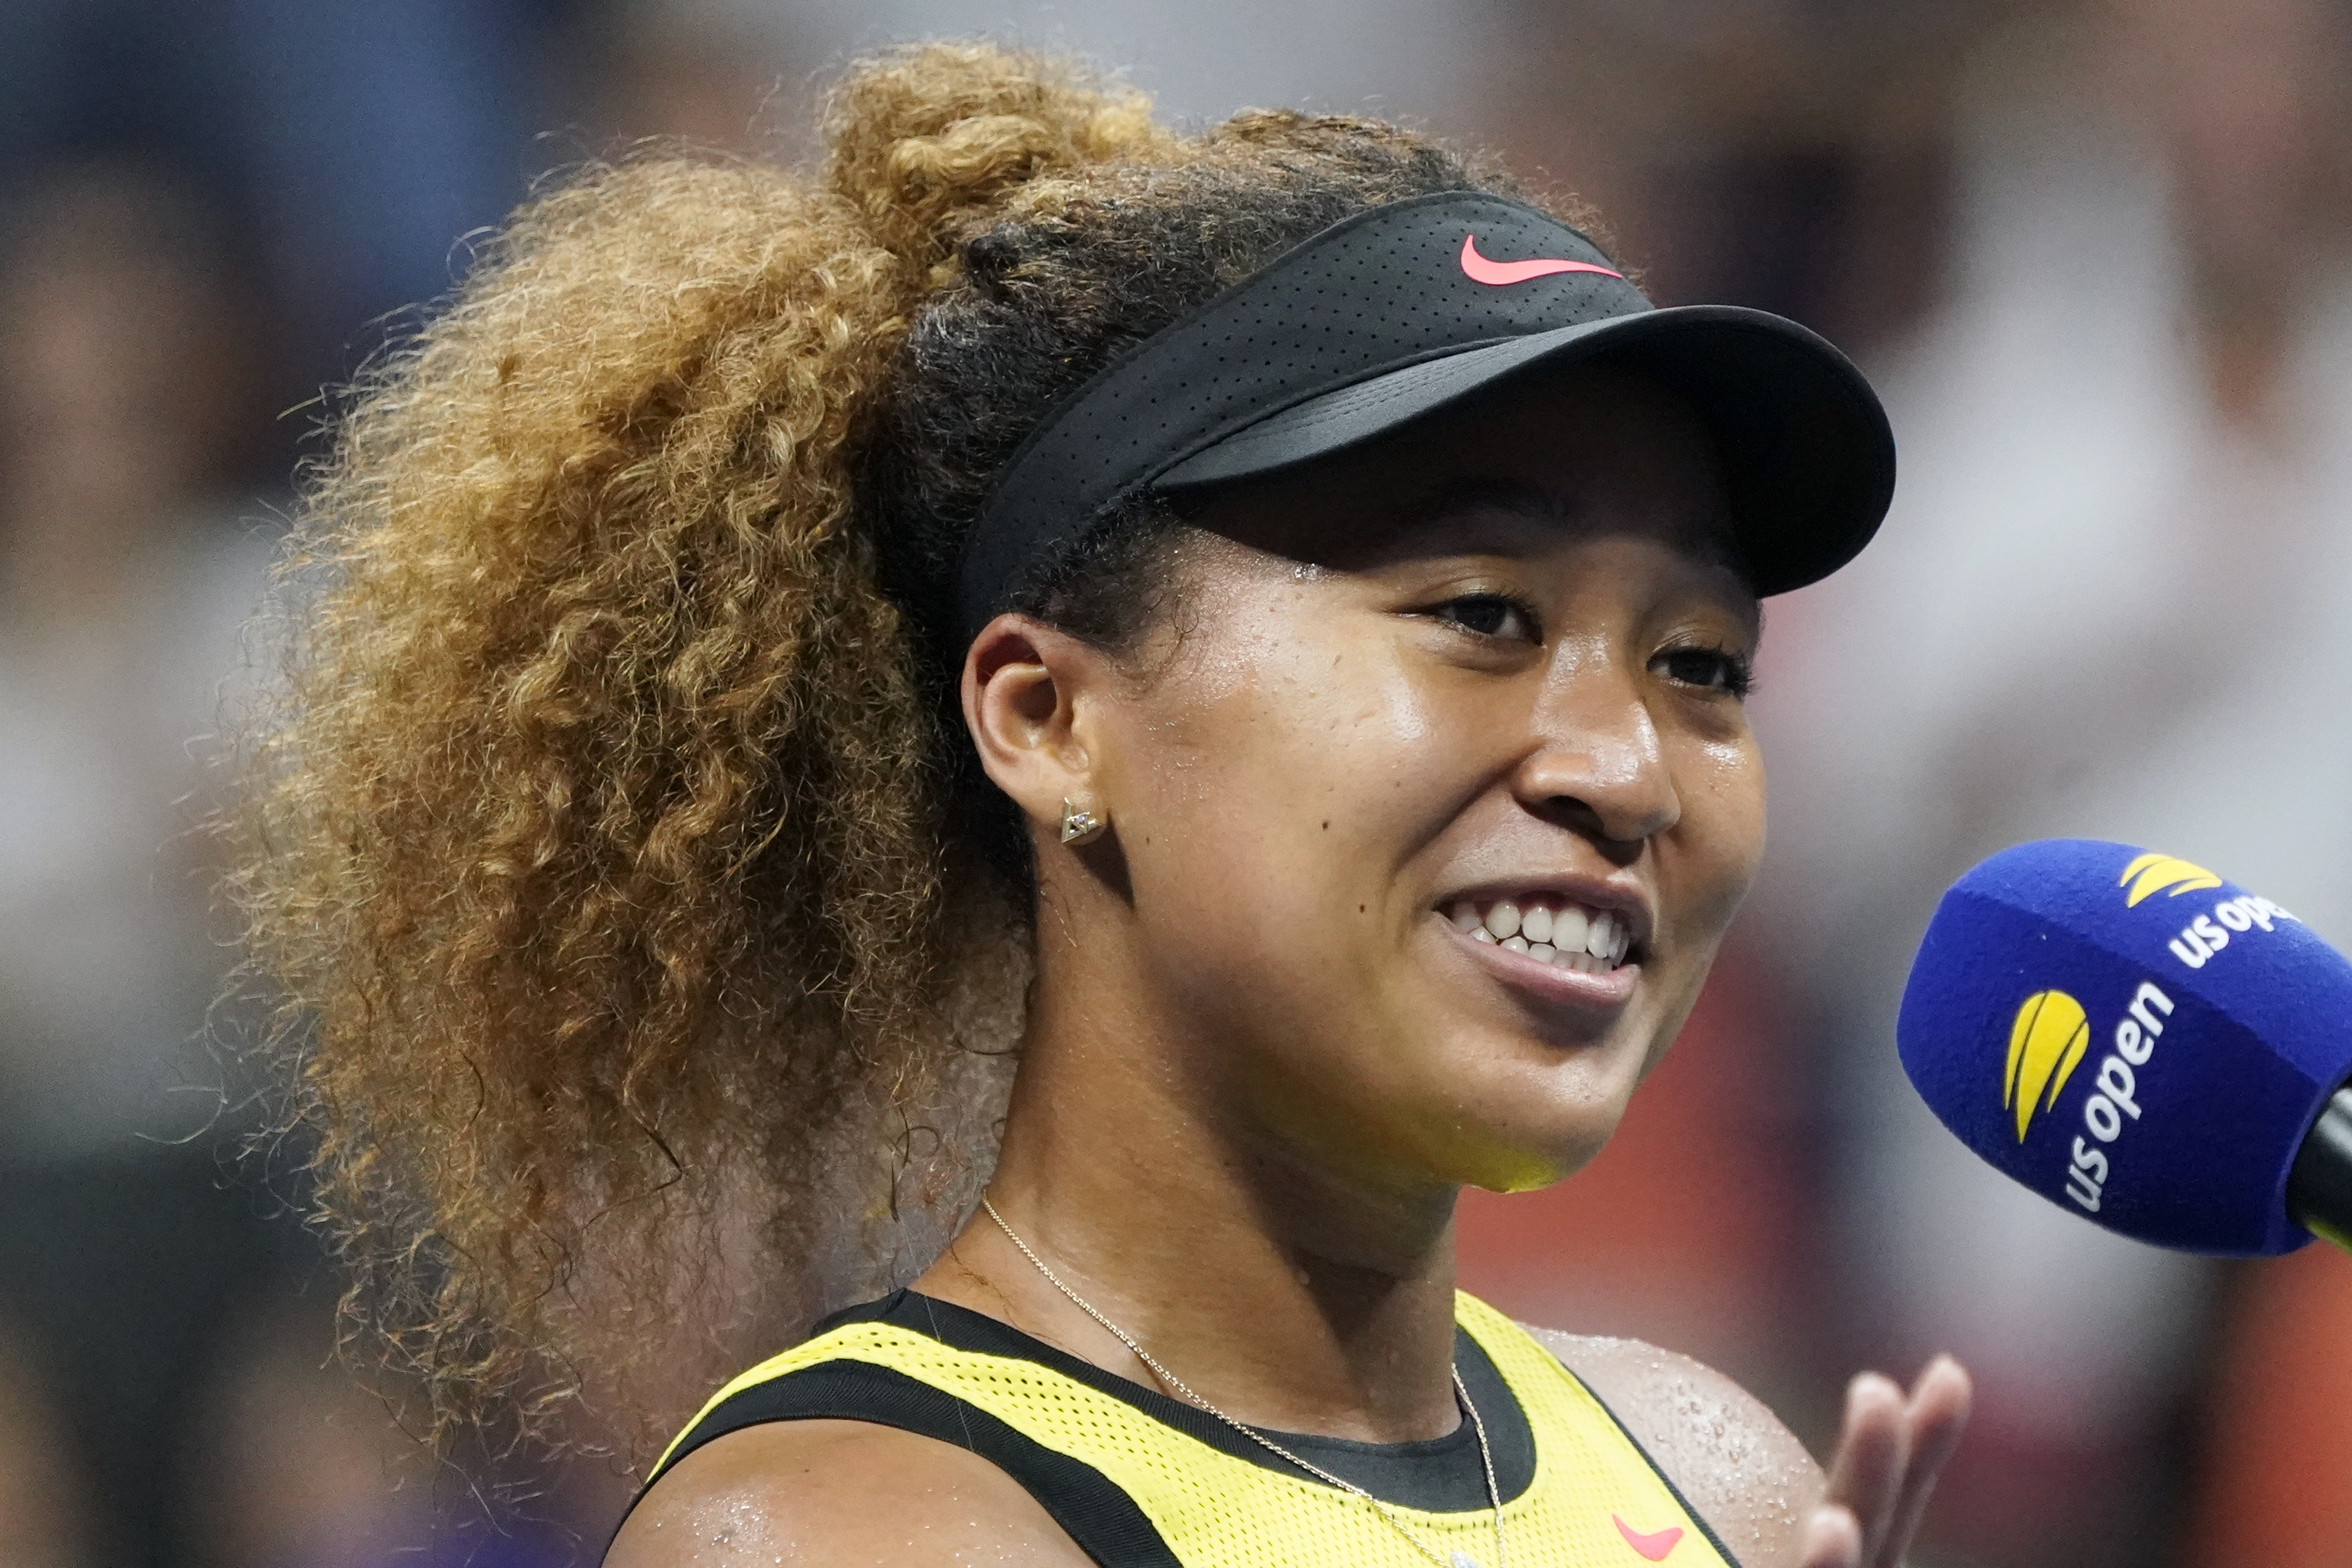 Naomi Osaka Makes U.S. Open Return. But Not for Tennis. - The New